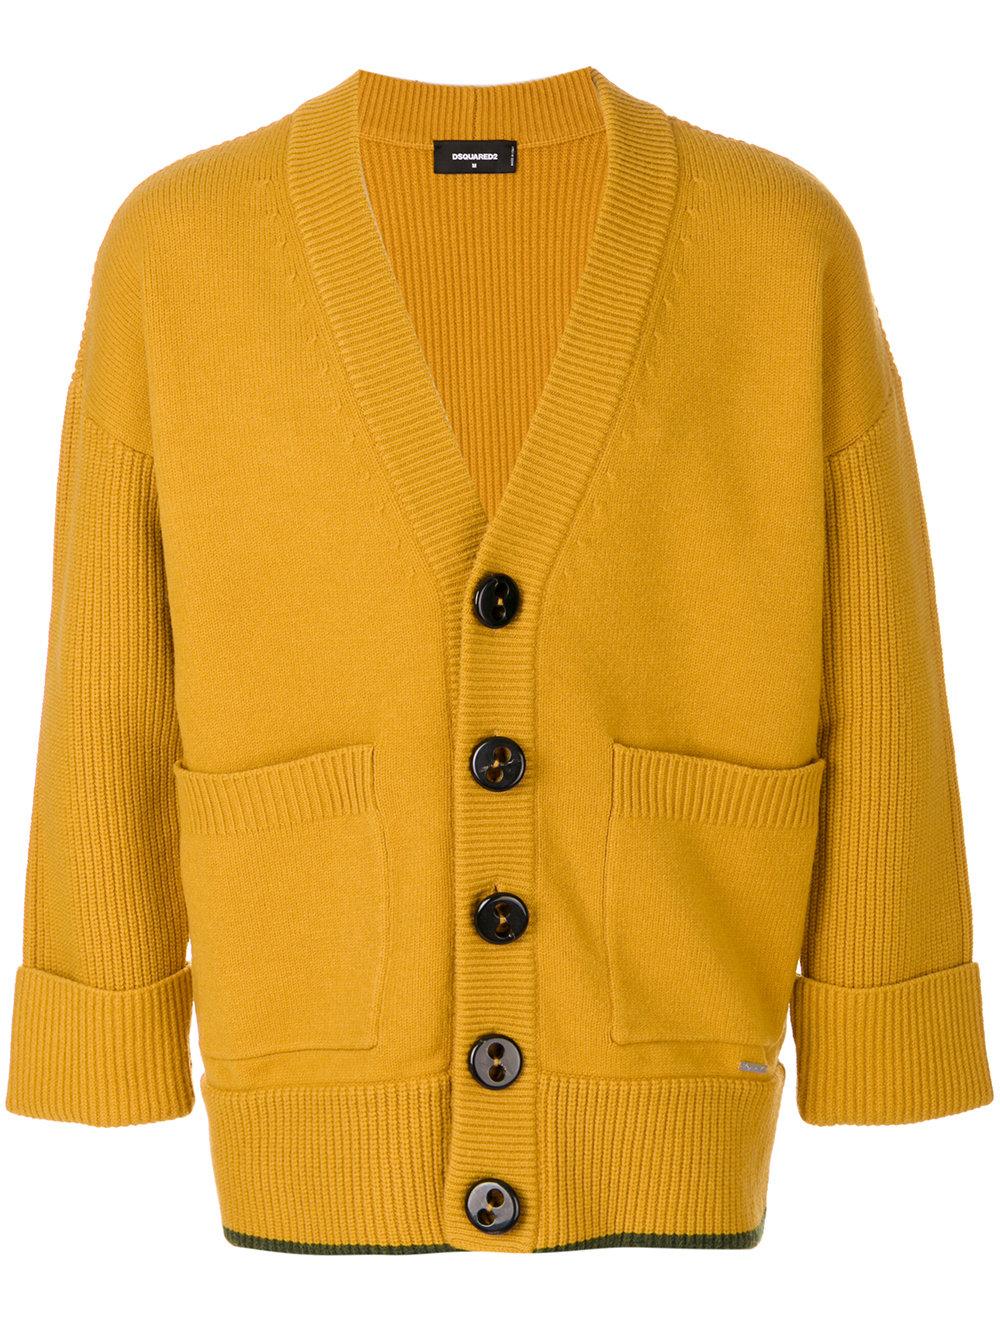 Lyst - Dsquared² Oversized Button Cardigan in Yellow for Men - Save 60%